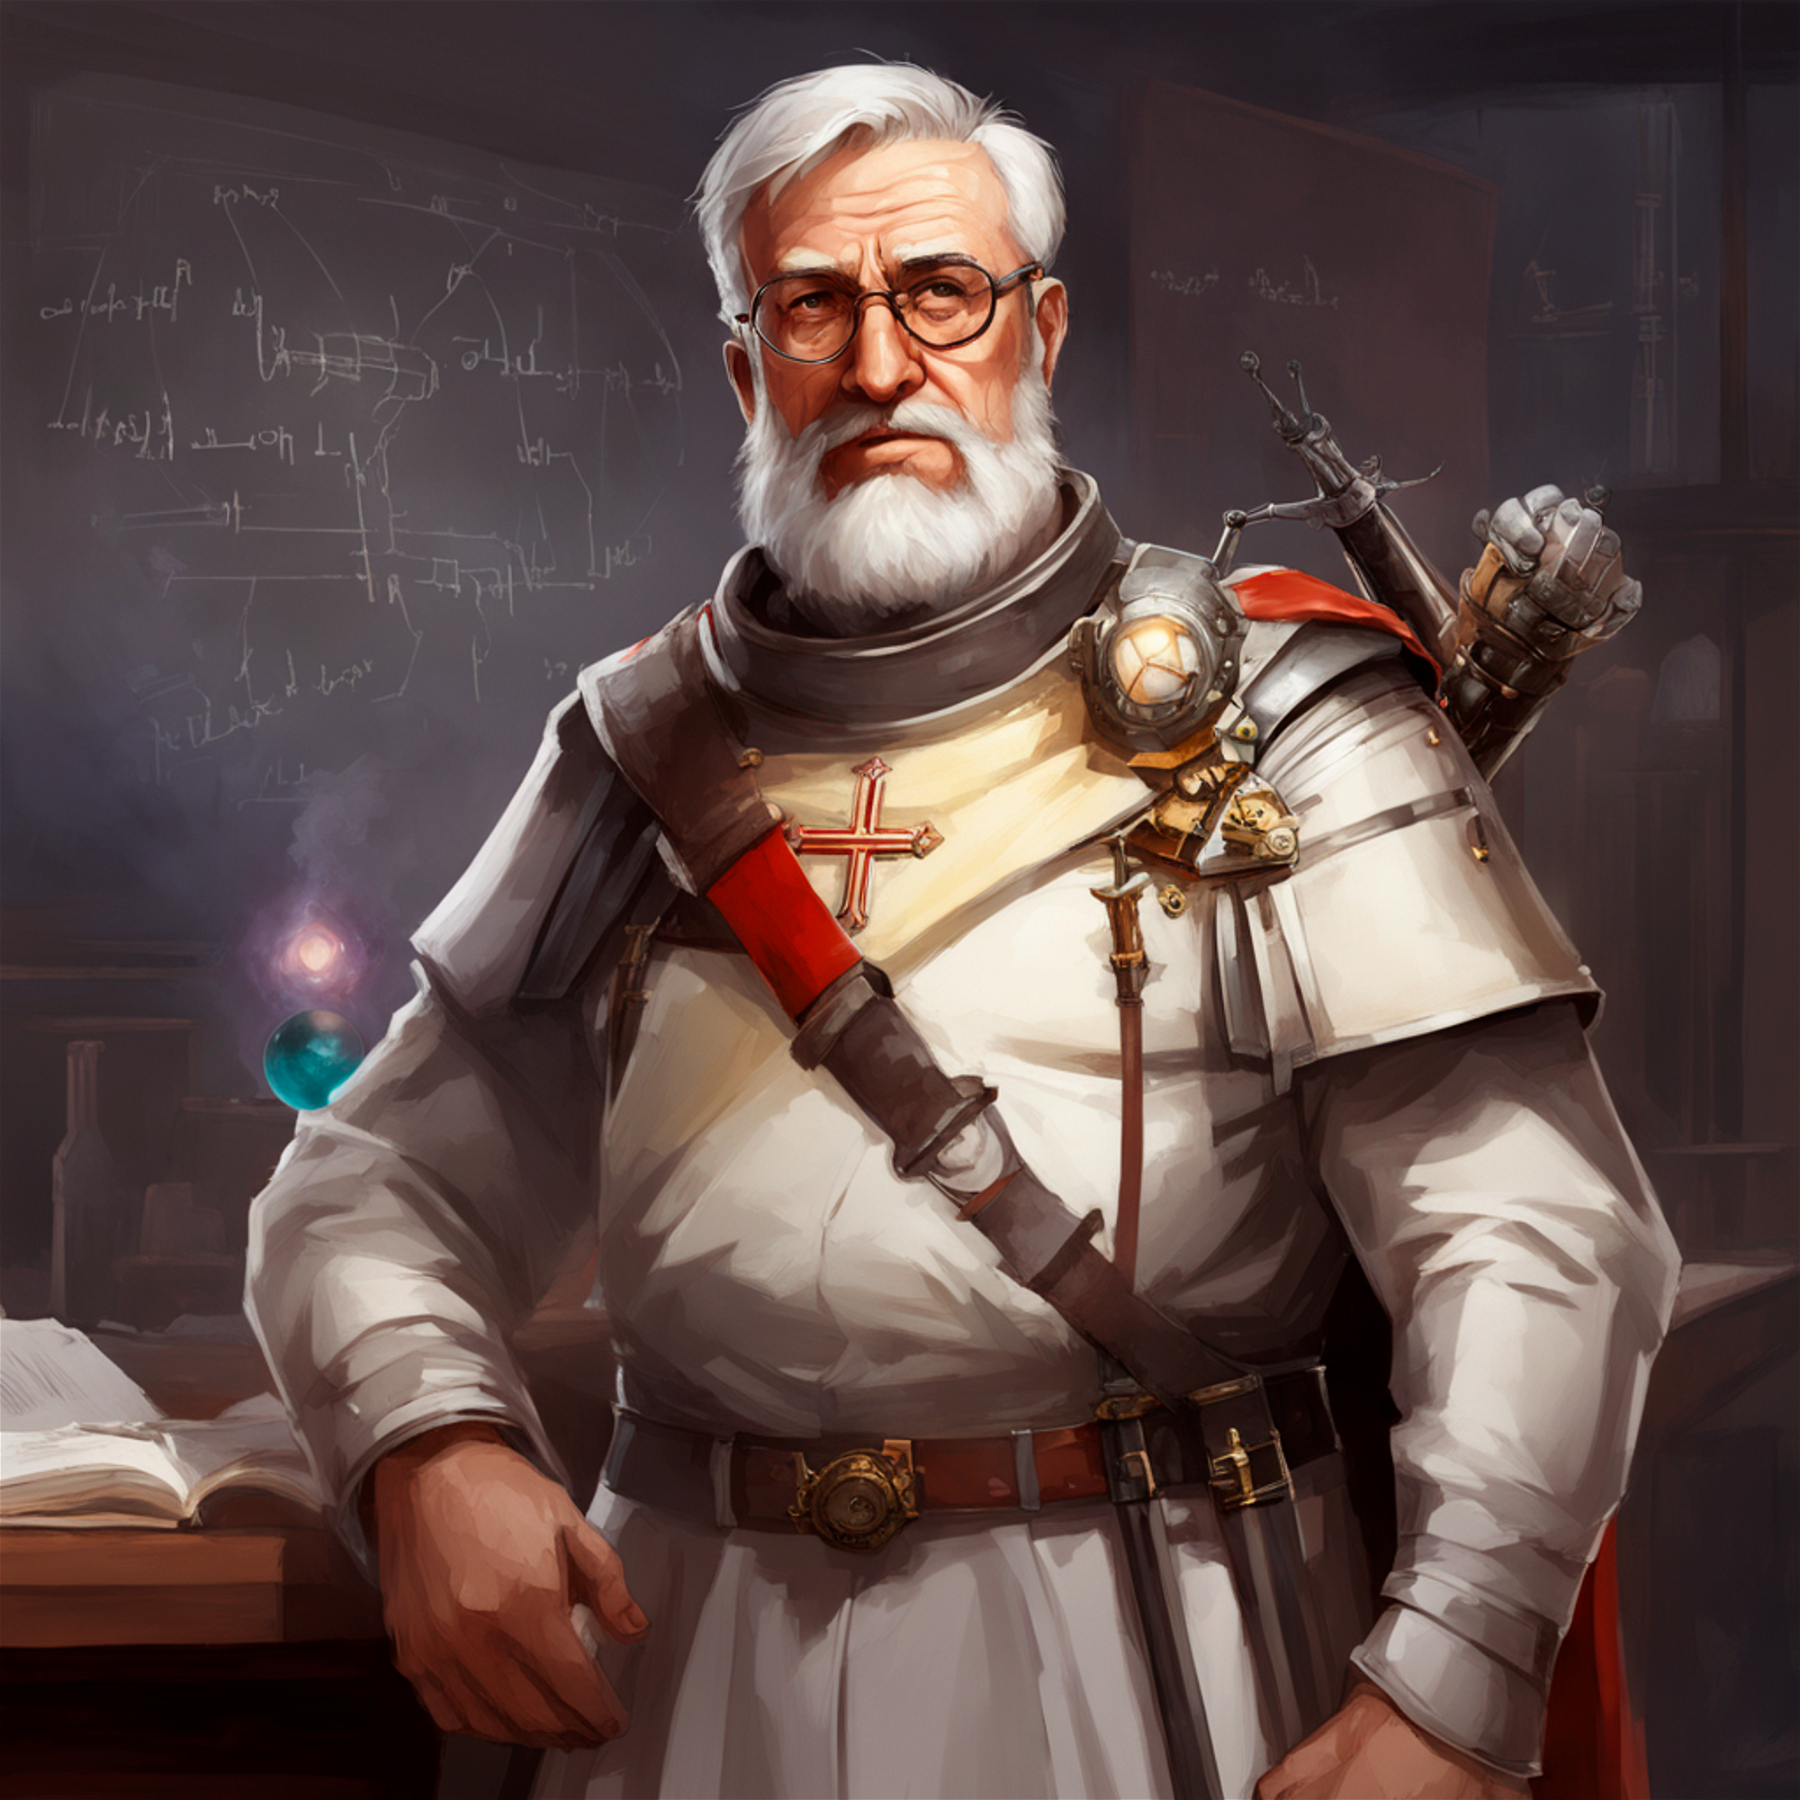 A noble crusading scientist, who seeks to enlist the hero in their worthy but probably illegal quest